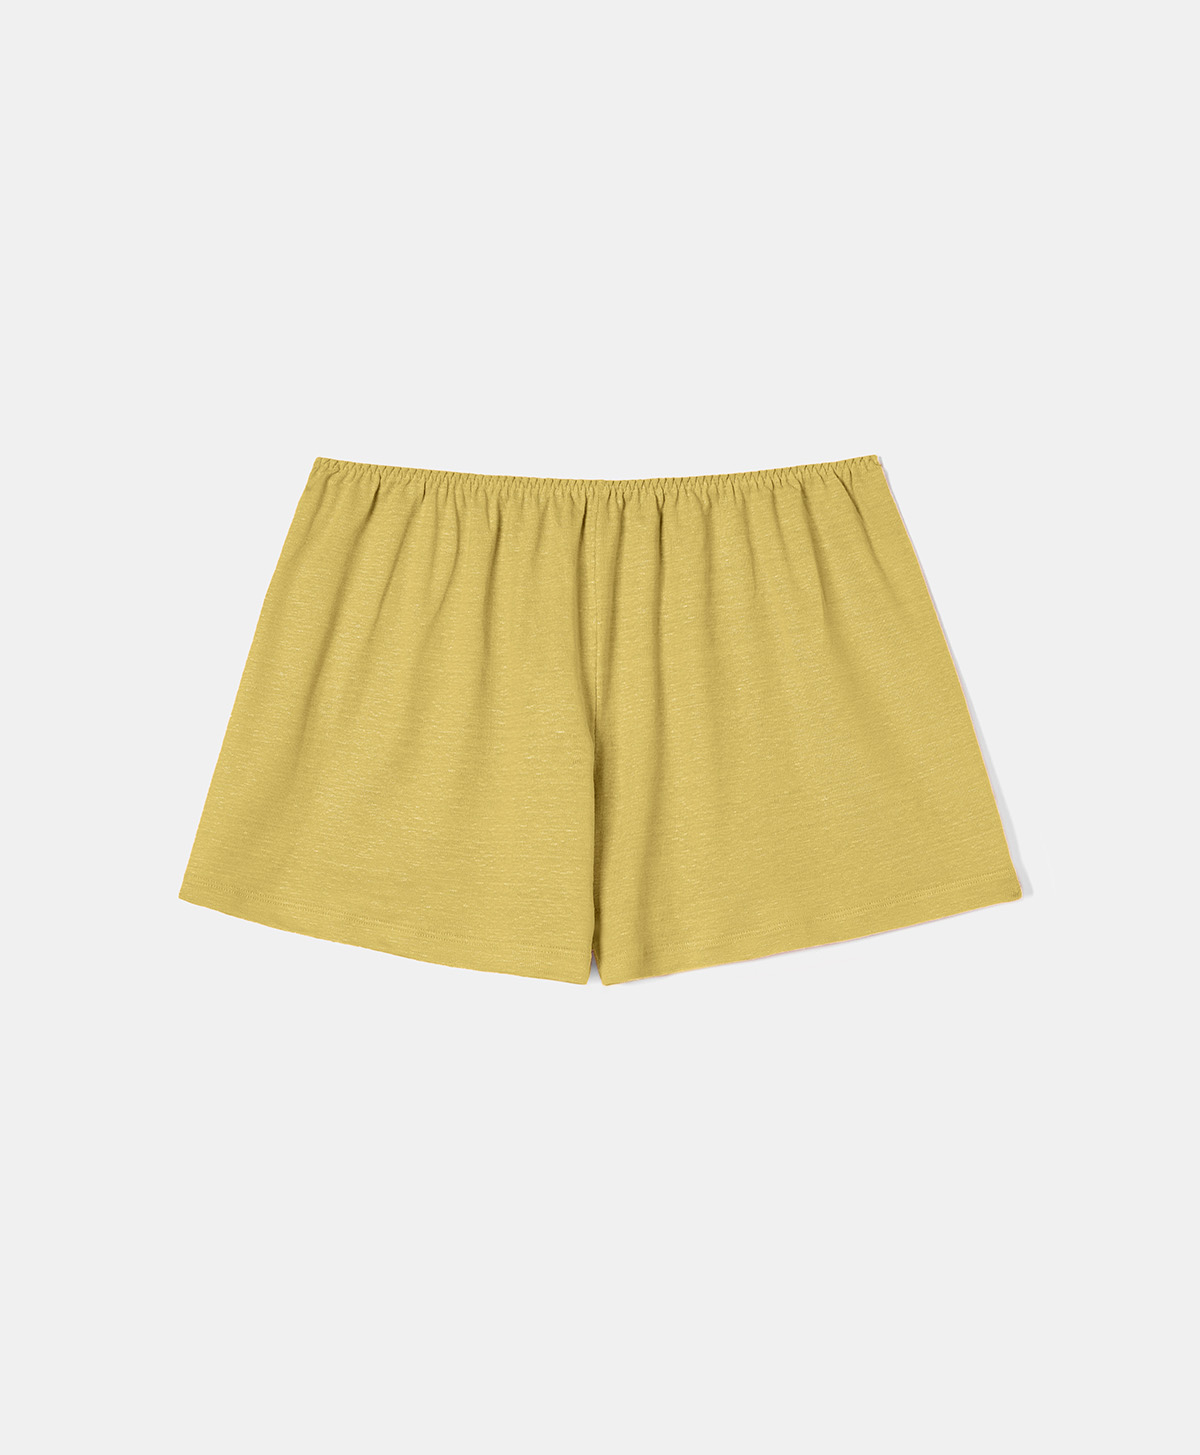 LICIA SHORTS IN STRETCH LINEN JERSEY - LIME - Momonì